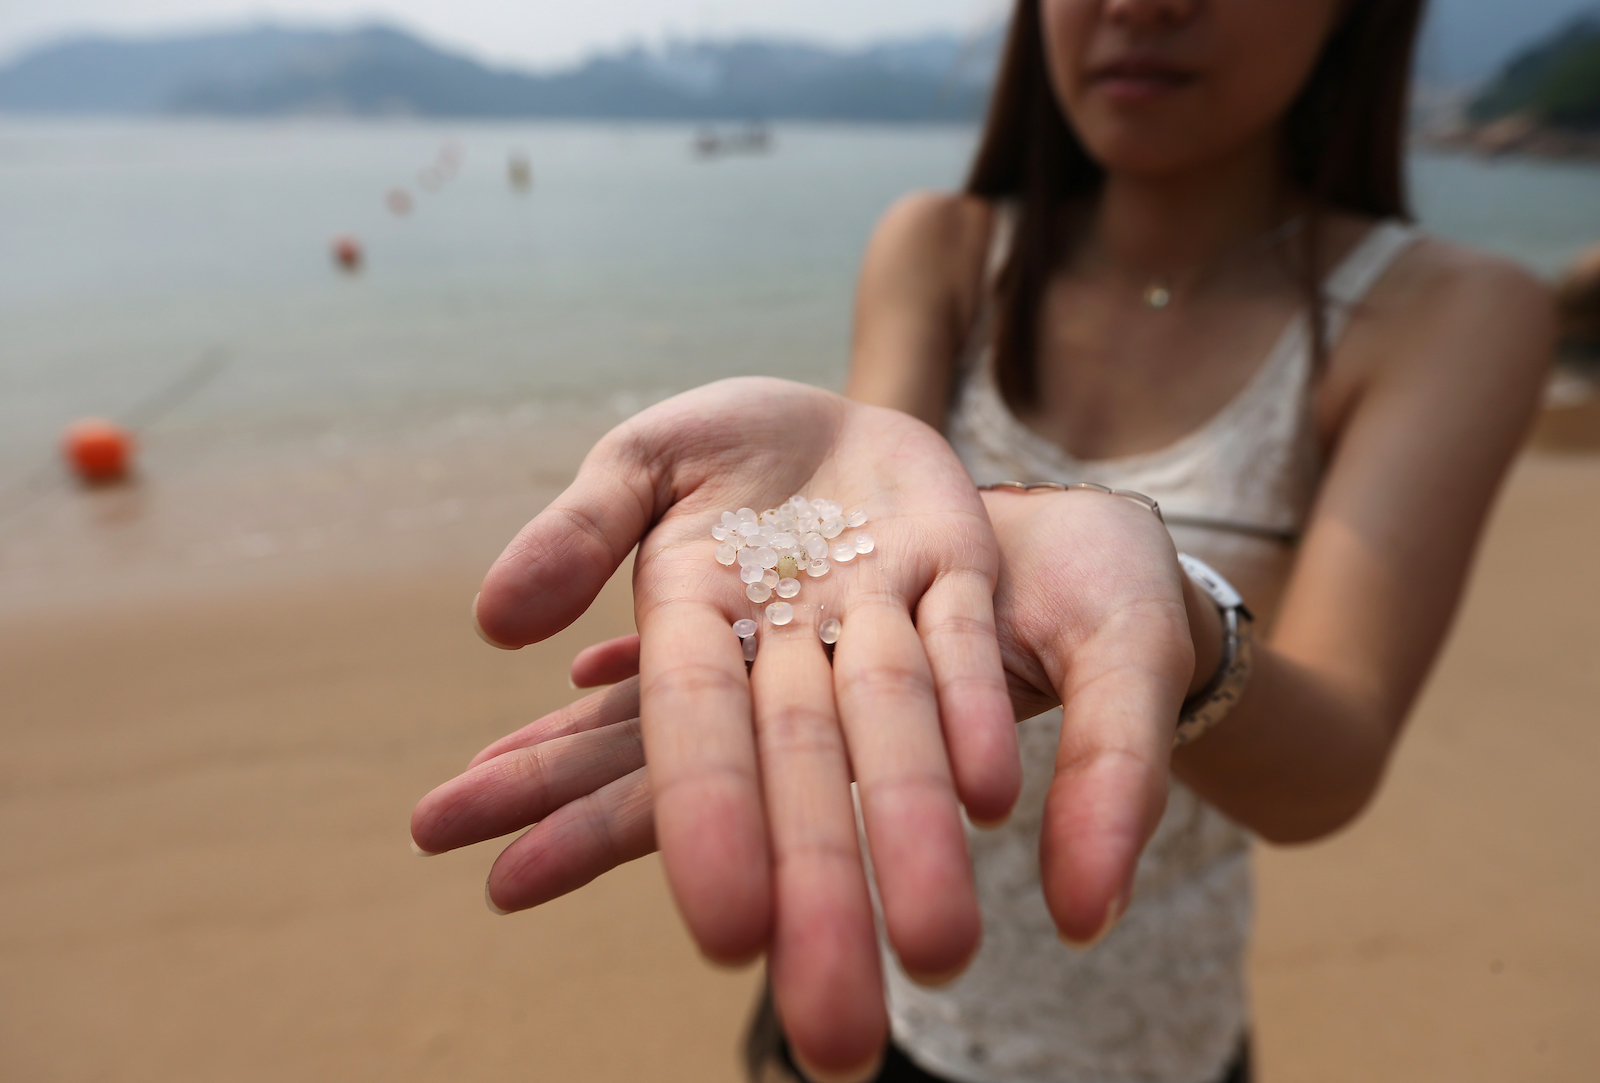 About 150 tons of pellets were spilled into the sea from a vessel when Typhoon Vicente in 2012, and some of the pellets drifted into fish farms.